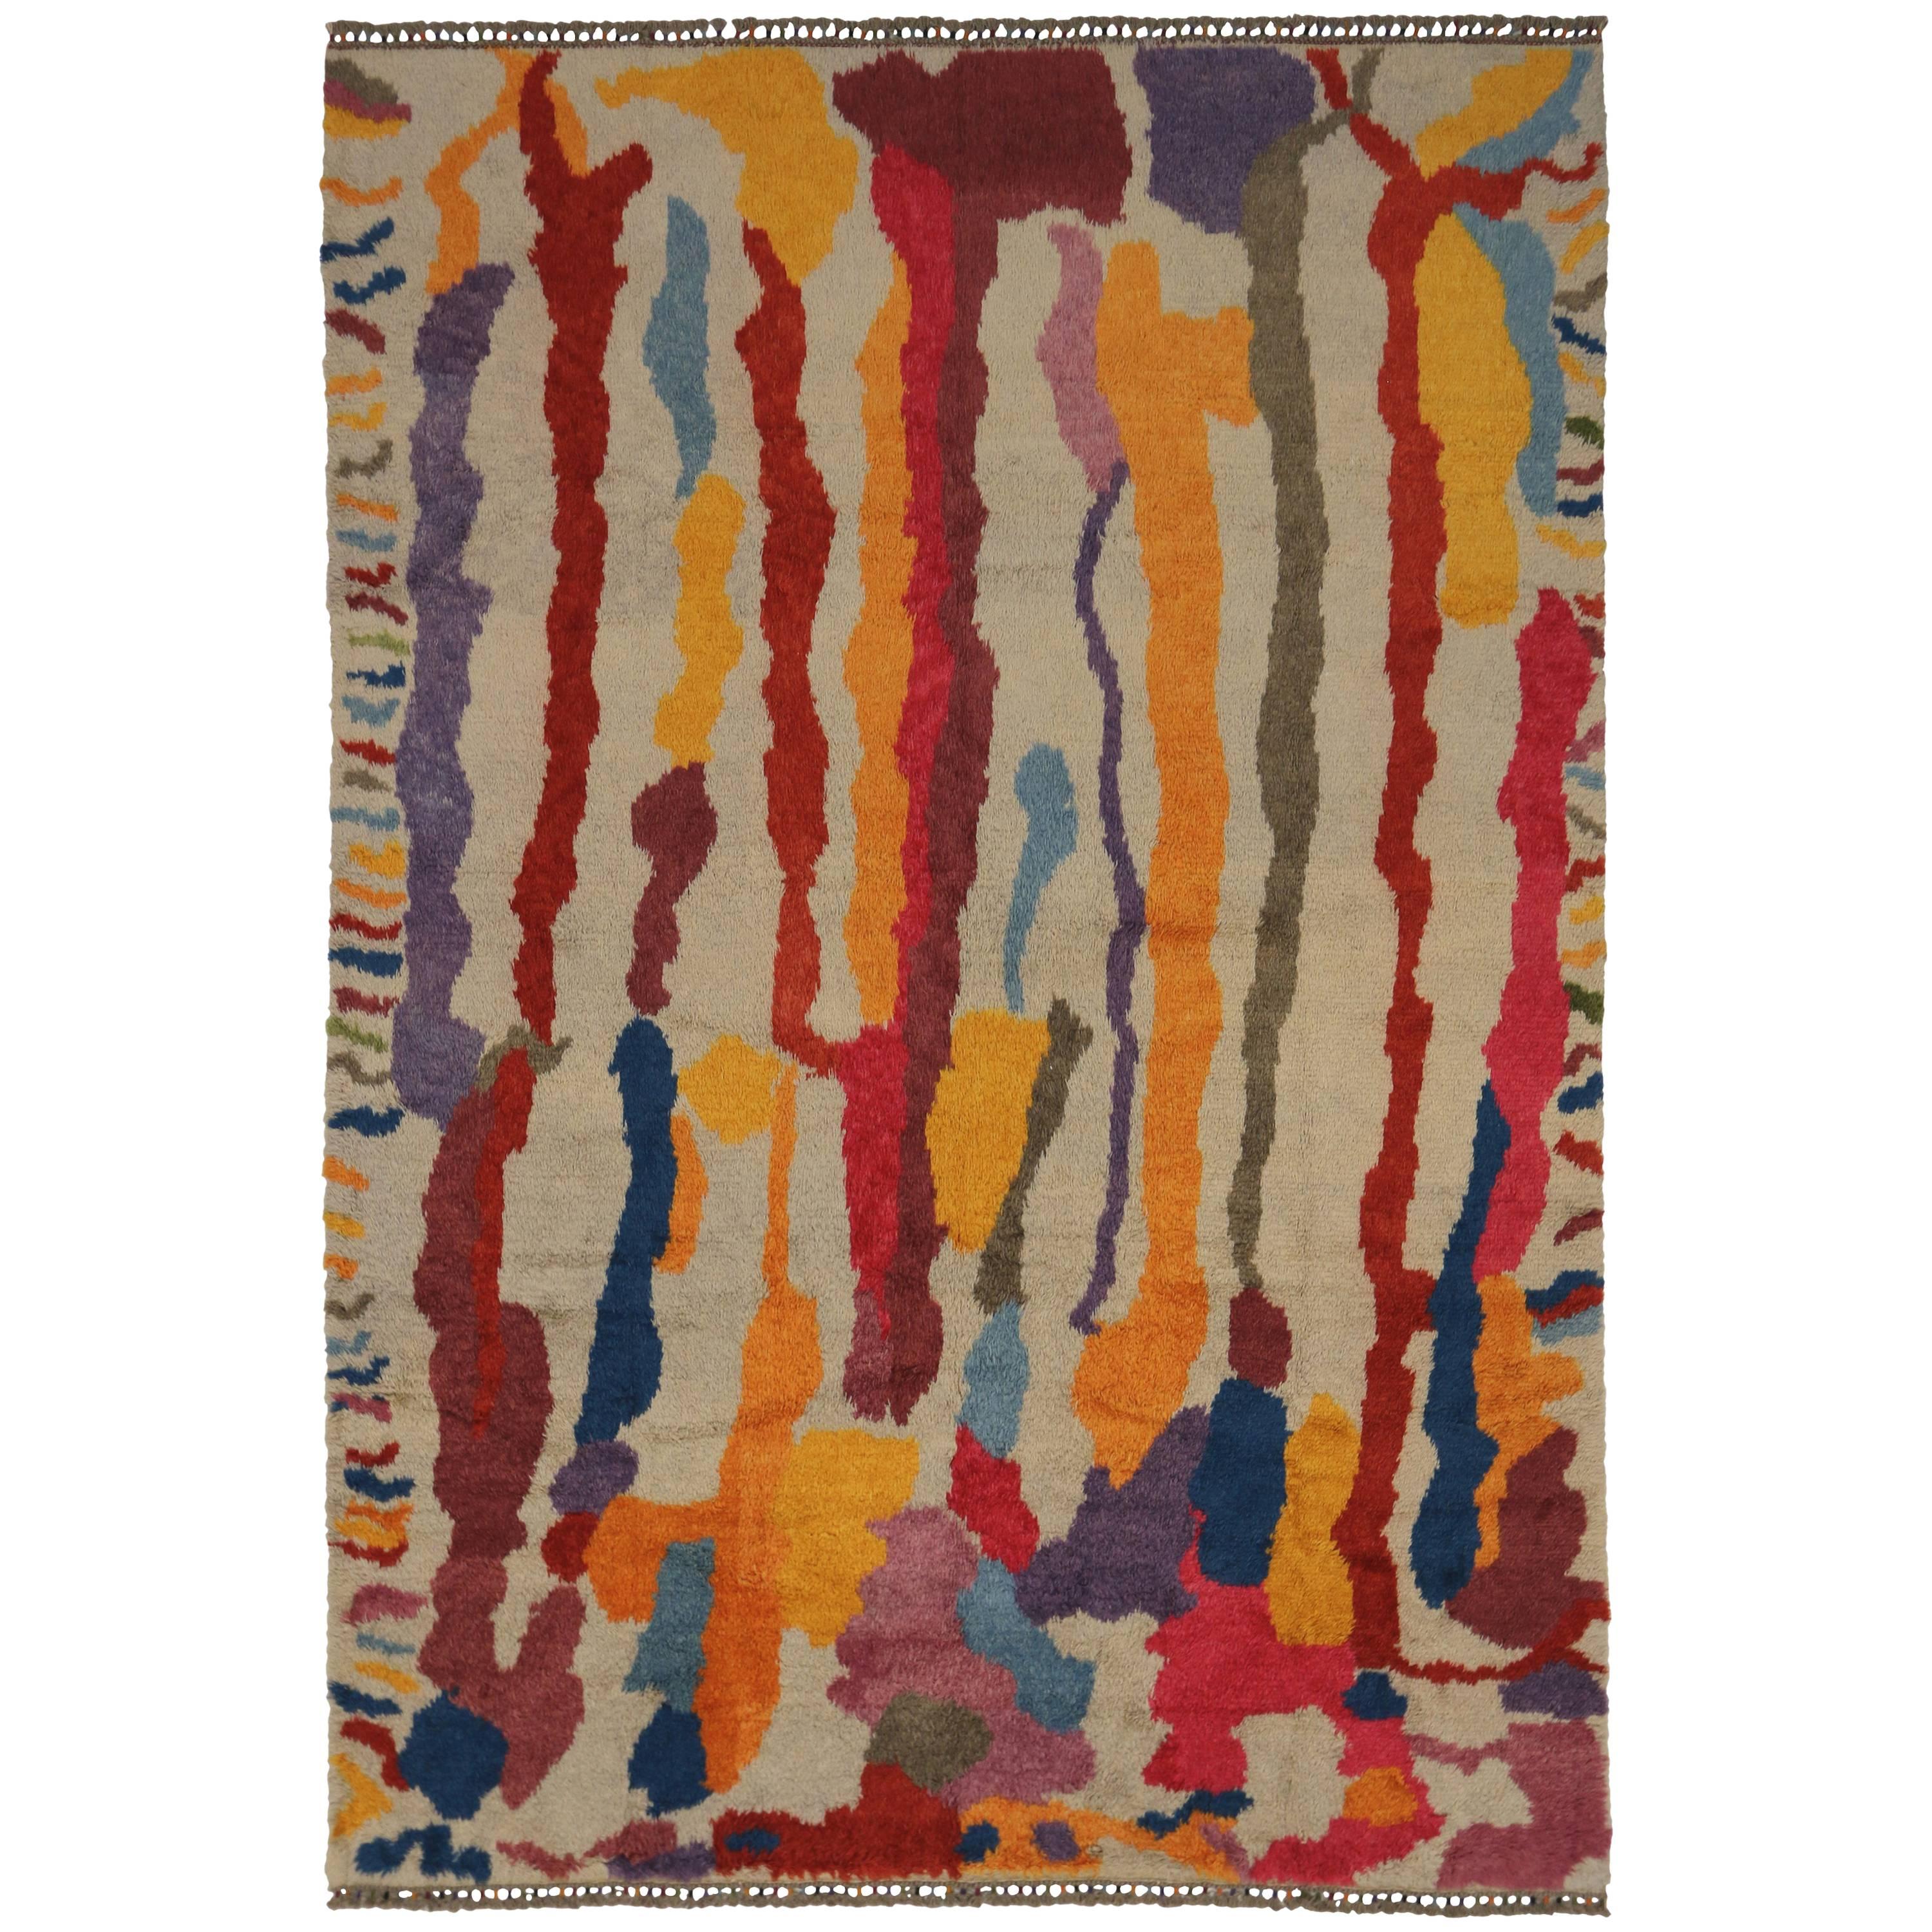 Modern Turkish Tulu Shag Rug with Contemporary Abstract Paint Drip Style